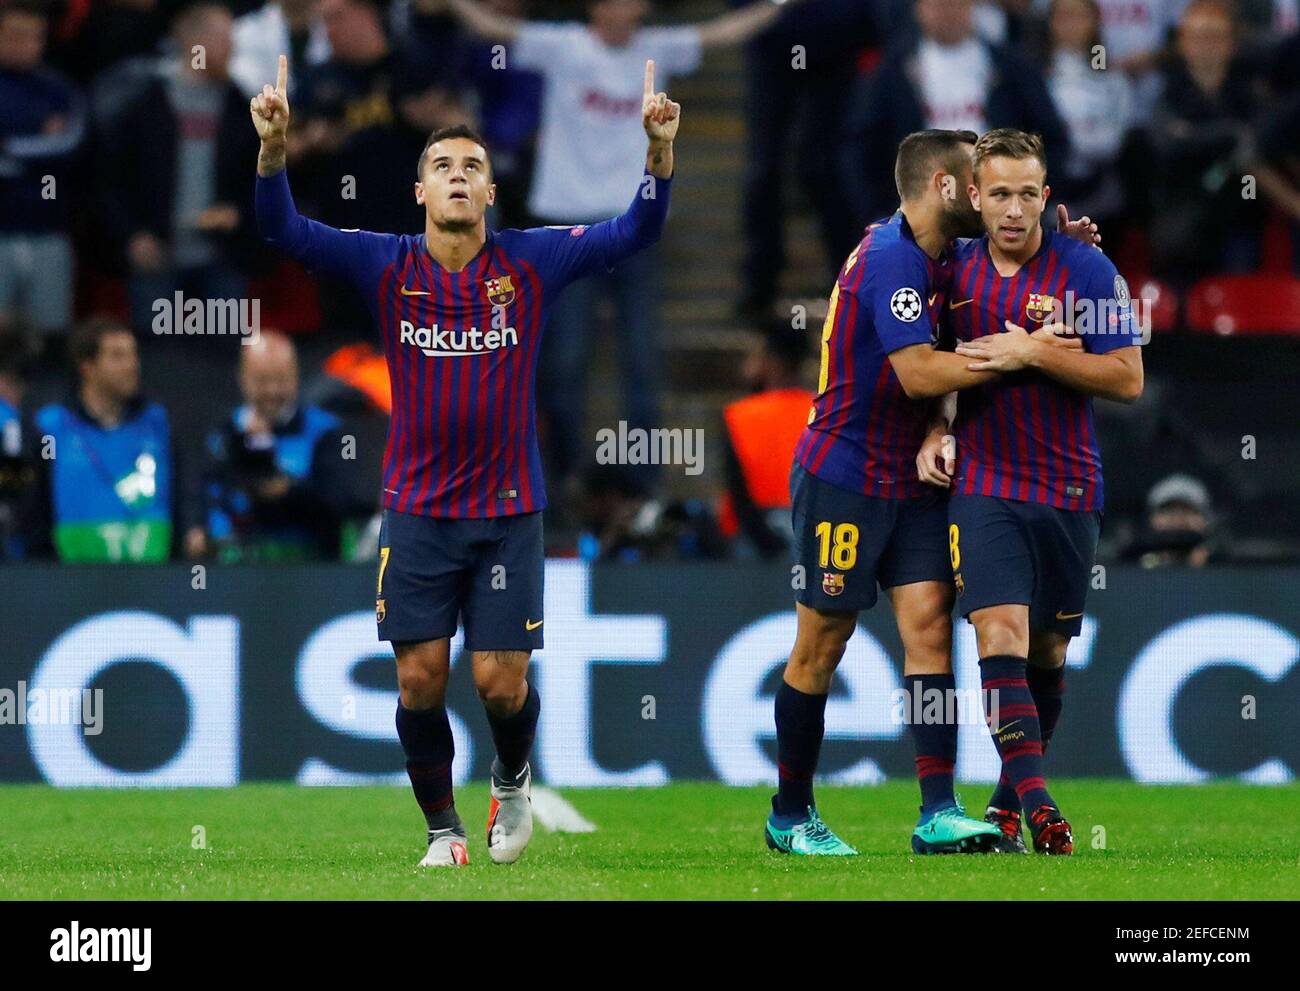 Soccer Football - Champions League - Group Stage - Group B - Tottenham Hotspur v FC Barcelona - Wembley Stadium, London, Britain - October 3, 2018  Barcelona's Philippe Coutinho celebrates scoring their first goal   REUTERS/Eddie Keogh Stock Photo